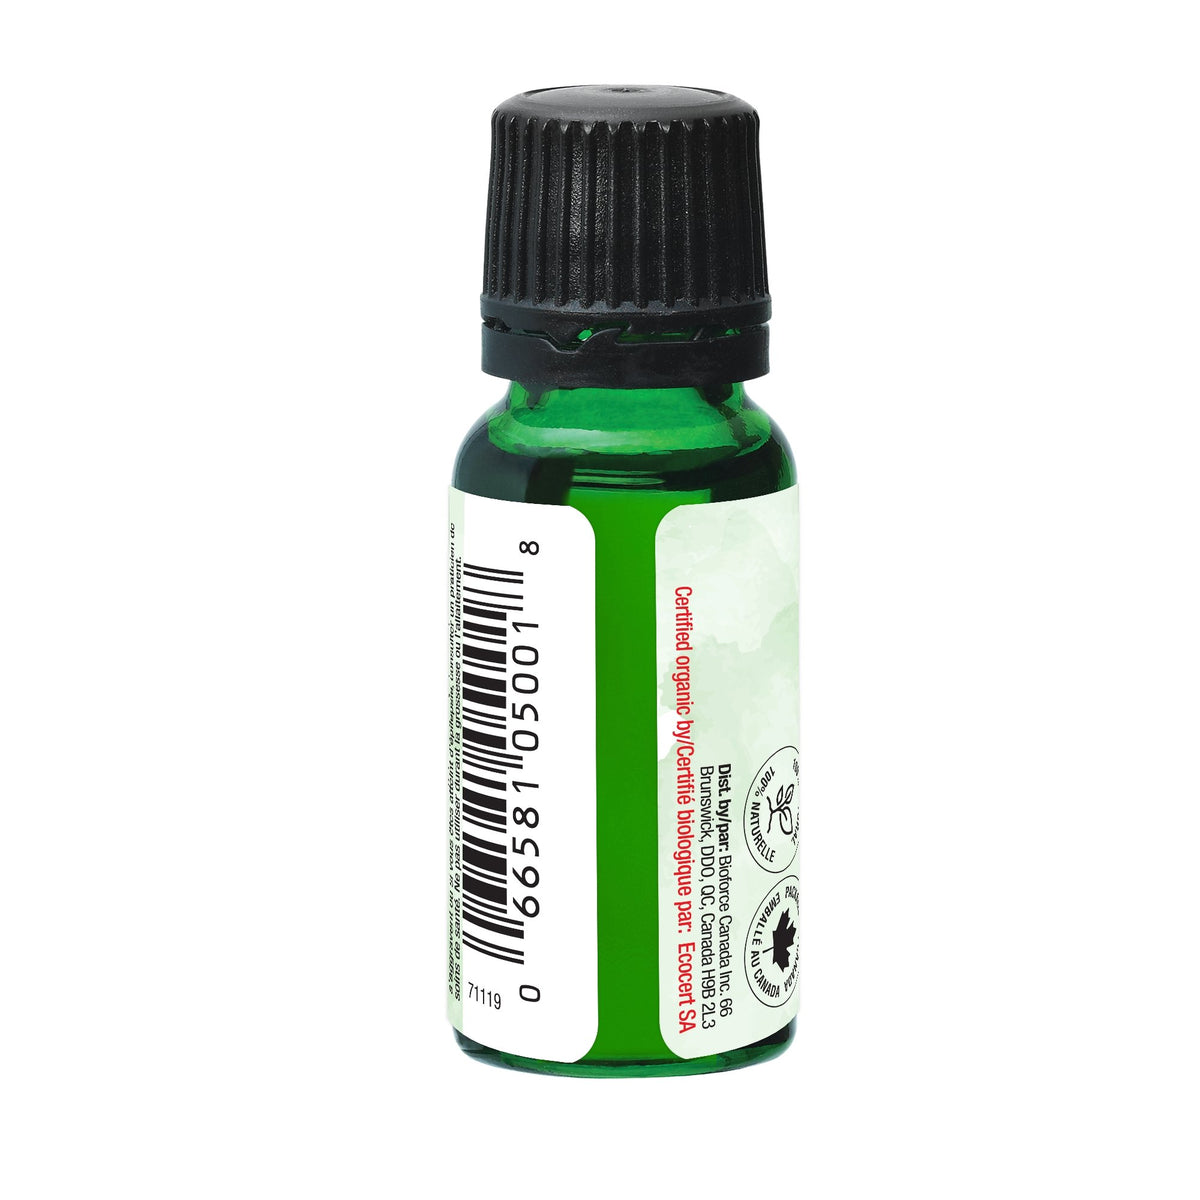 Organic Eucalyptus Essential Oil 100% pure and natural 15mL - Aromaforce